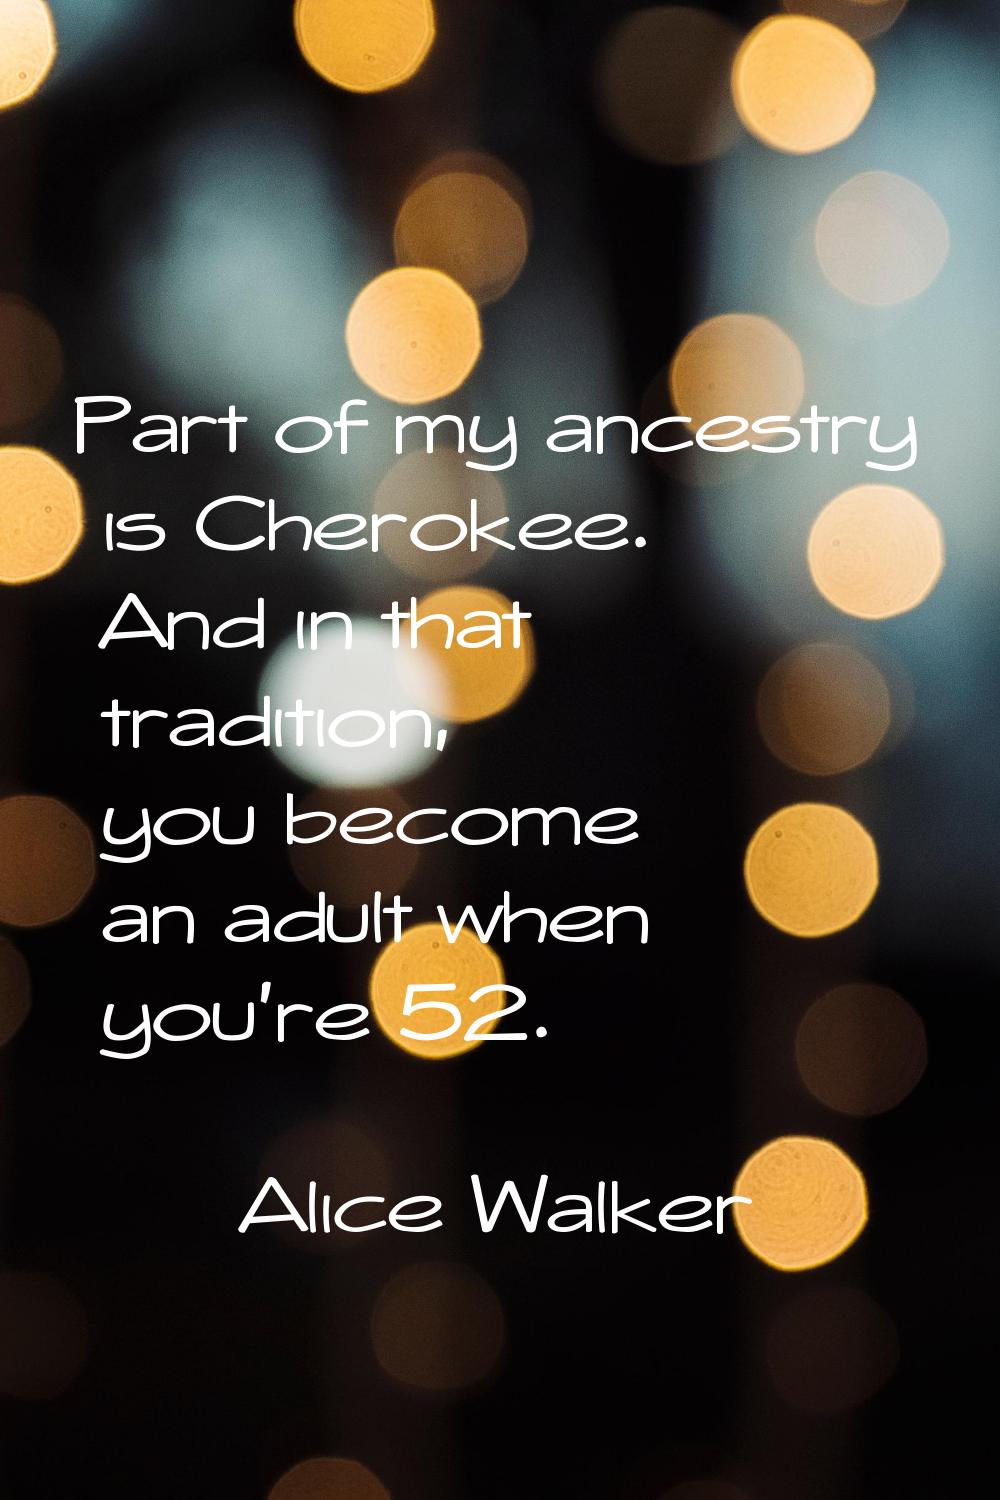 Part of my ancestry is Cherokee. And in that tradition, you become an adult when you're 52.